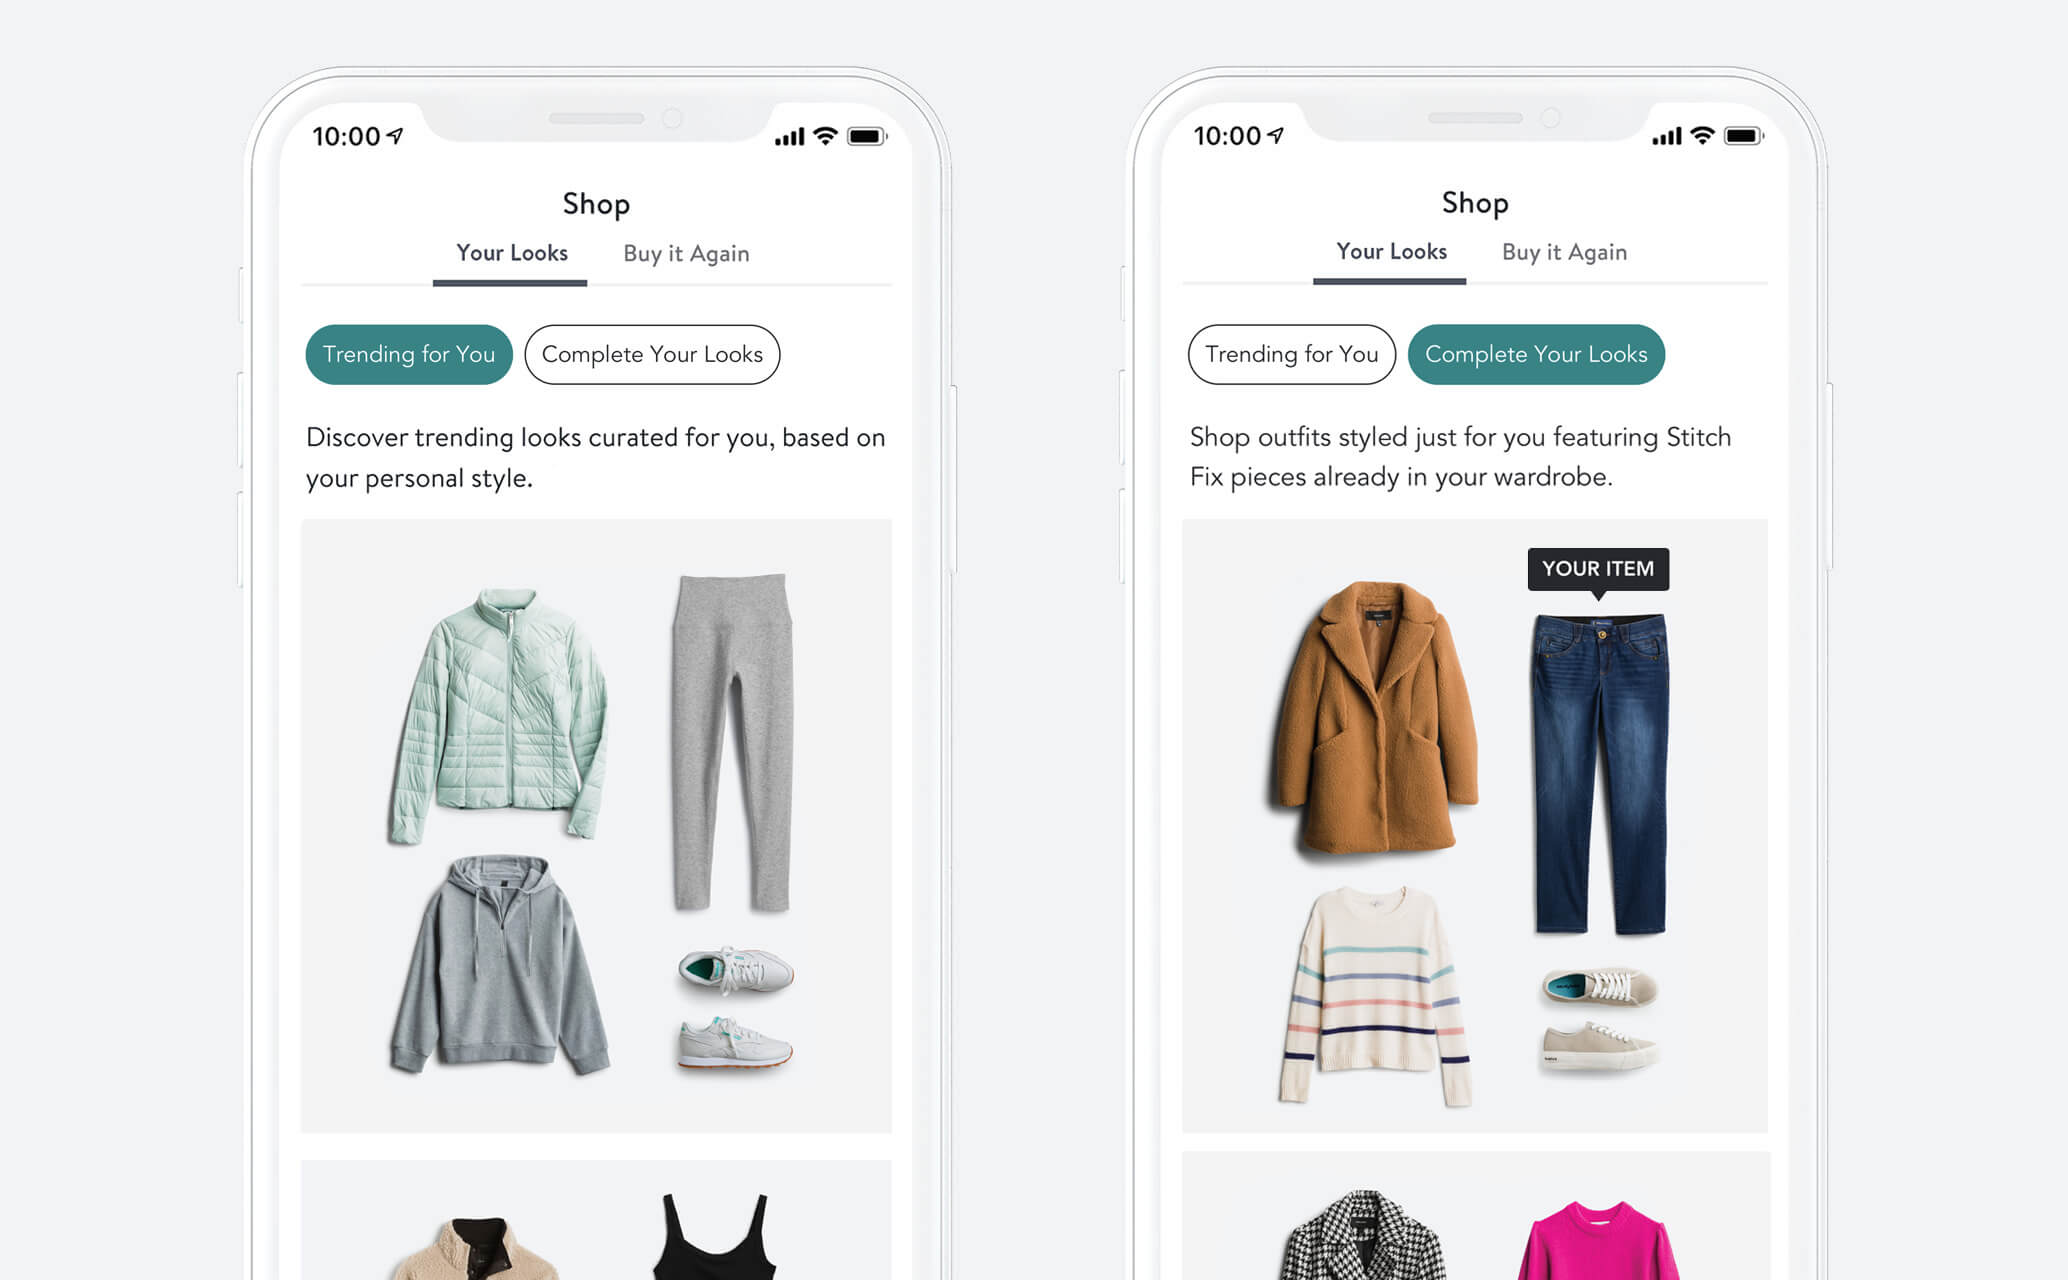 A screen with clothes showing AI's role in predicting consumer behavior